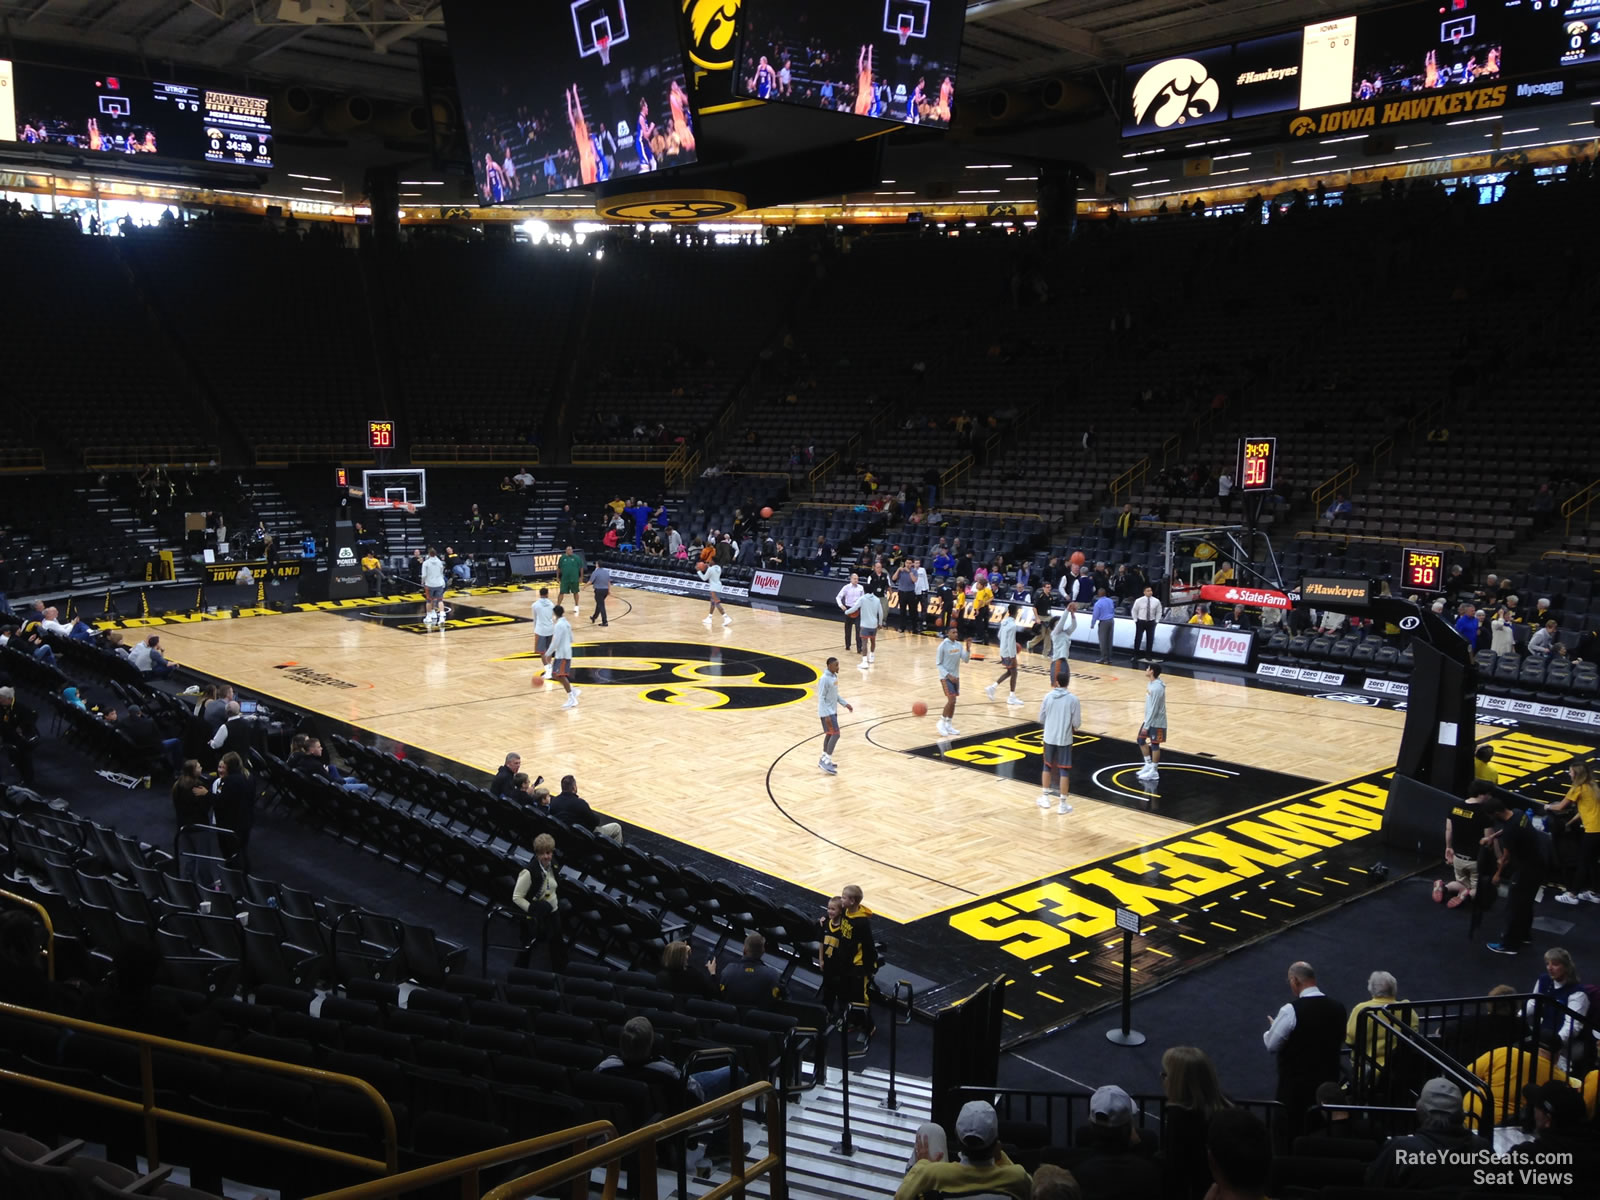 section jj, row 15 seat view  - carver-hawkeye arena